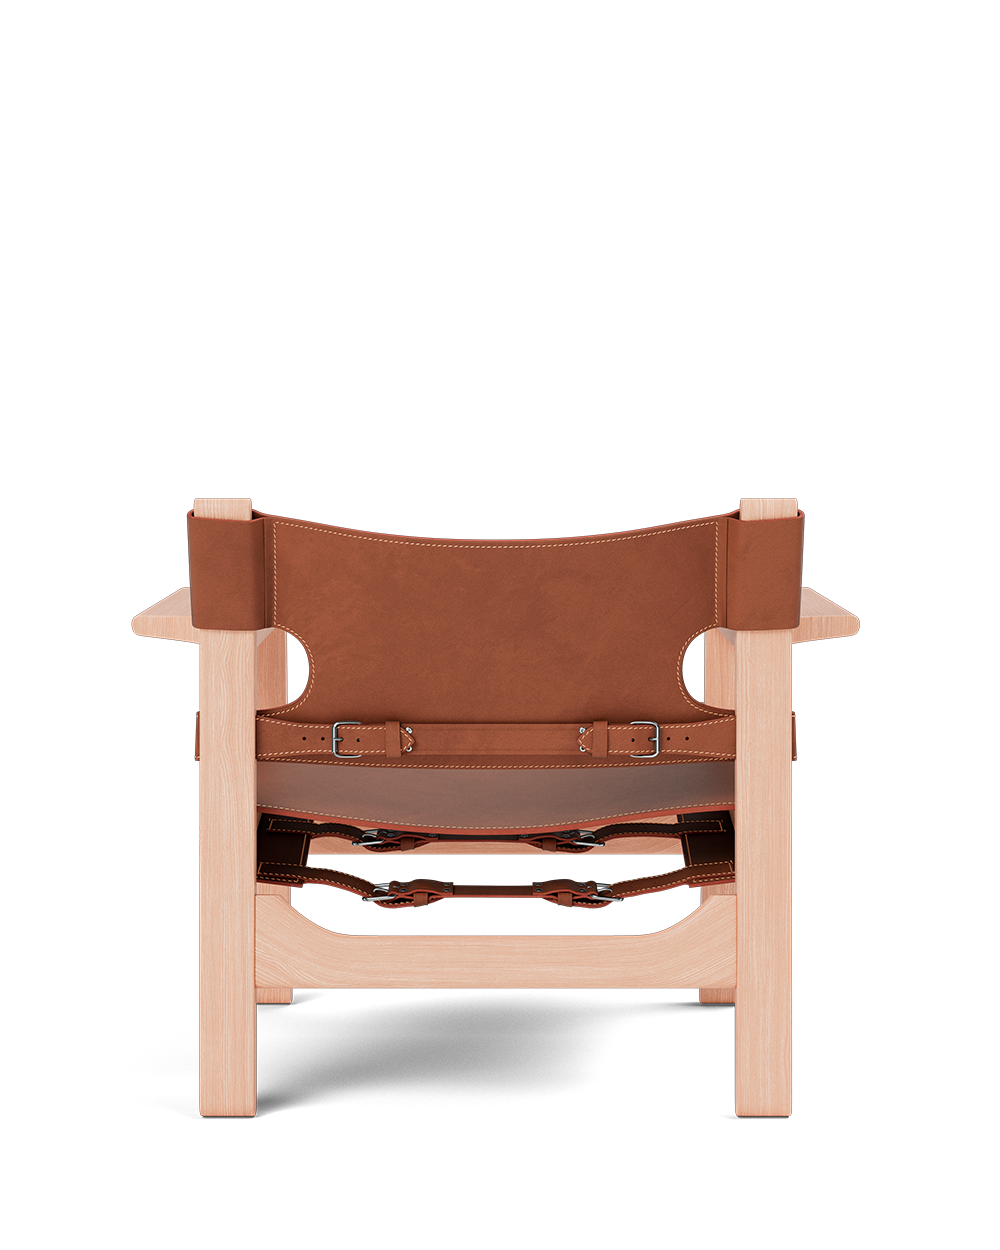 Fredericia The Spanish Chair - Cognac Leather - a sustainably designed chair with an oak wooden frame and vegetable leather seating - Enter The Loft